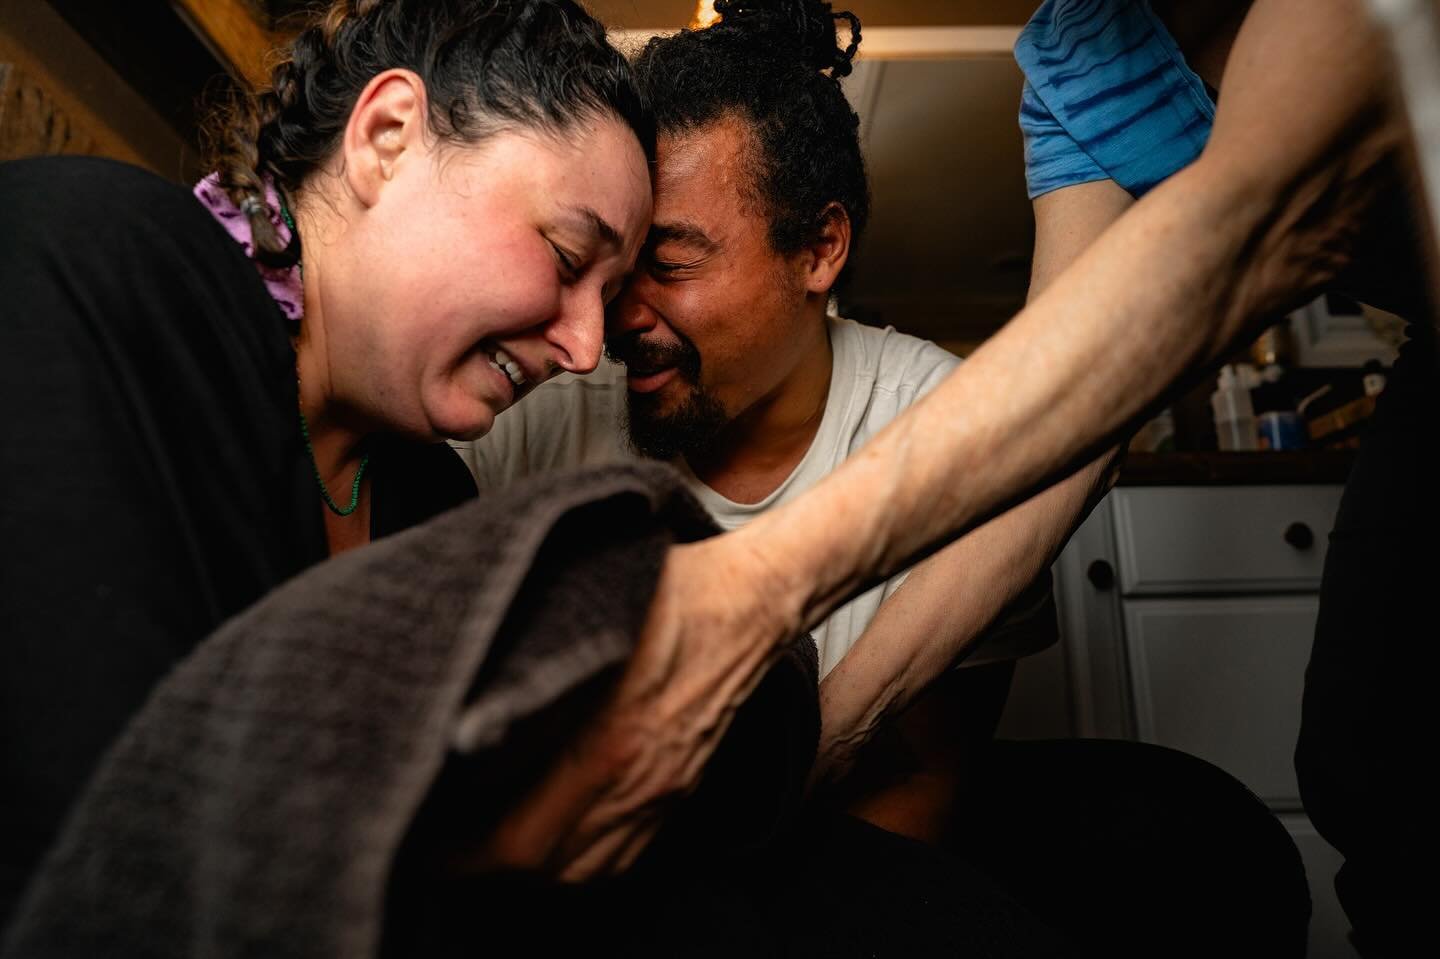 their faces say it all ❤️&zwj;🔥🥹 it was such an emotional and redemptive moment for this family, a beautiful homebirth after an unexpected cesarean. she was so immensely powerful through it all, a true birth warrior ✨ i am endlessly grateful to be 